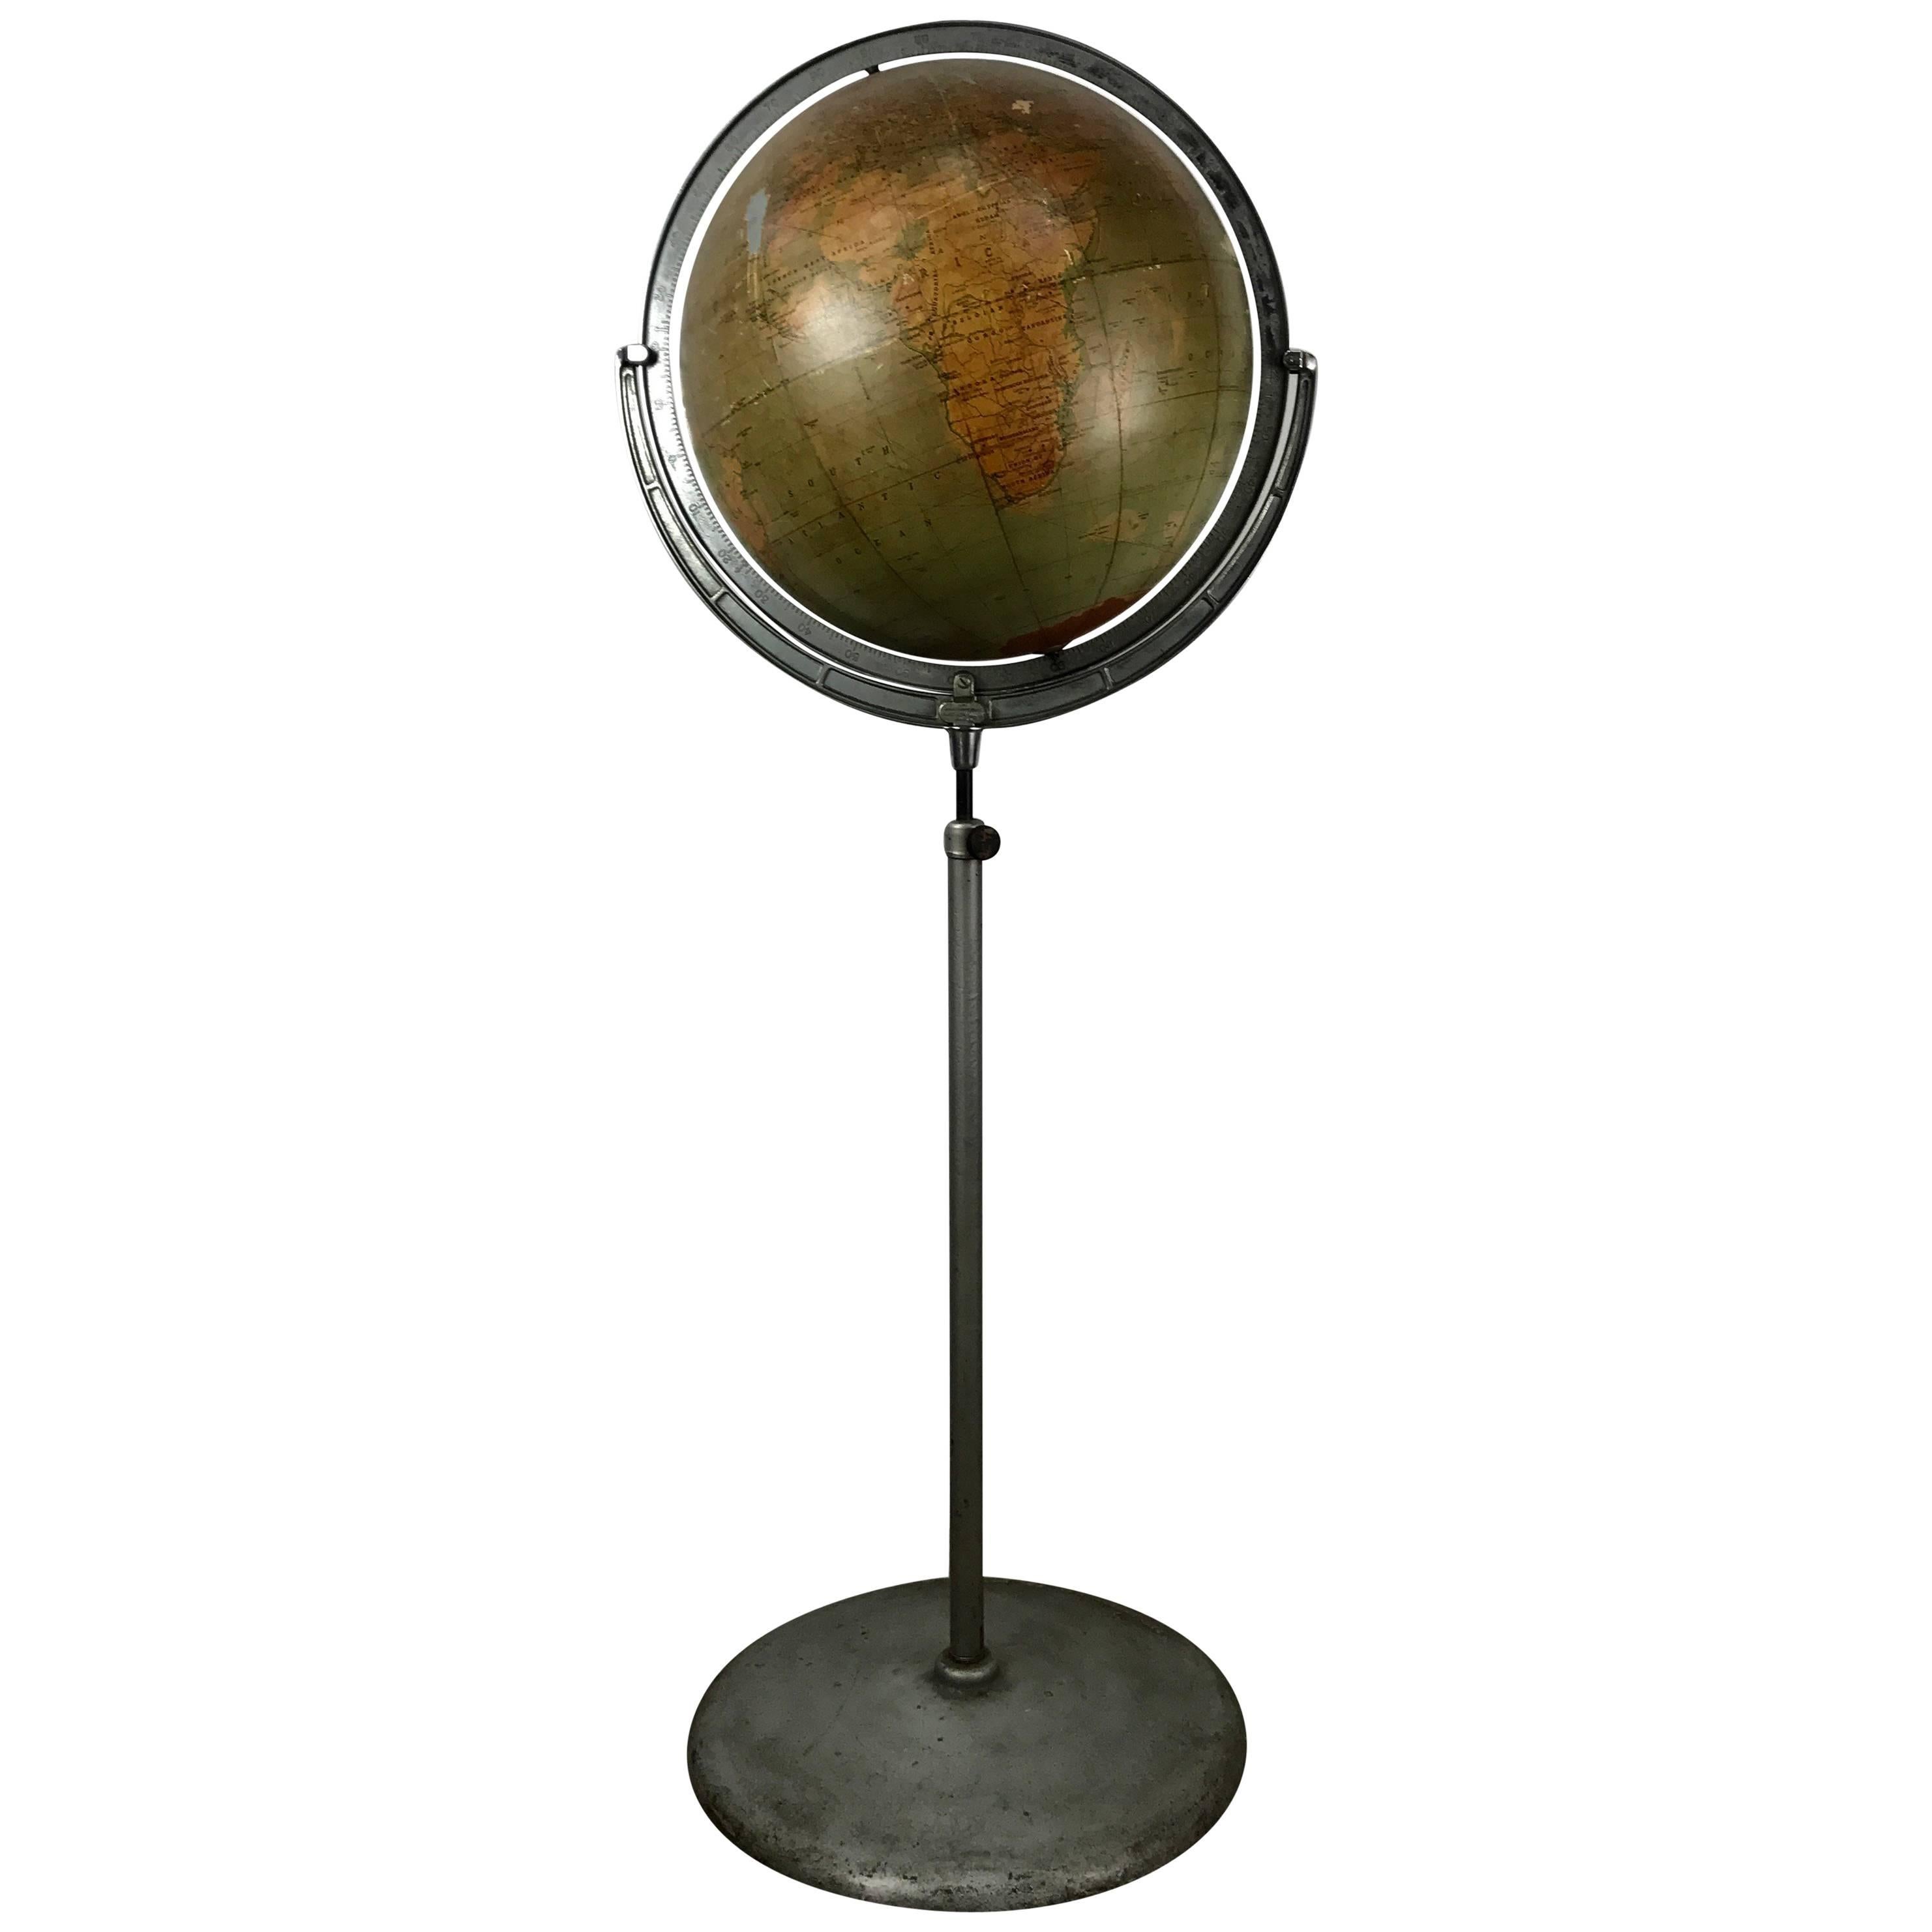 Telescoping Adjustable World Globe by Rand McNally, Chicago For Sale